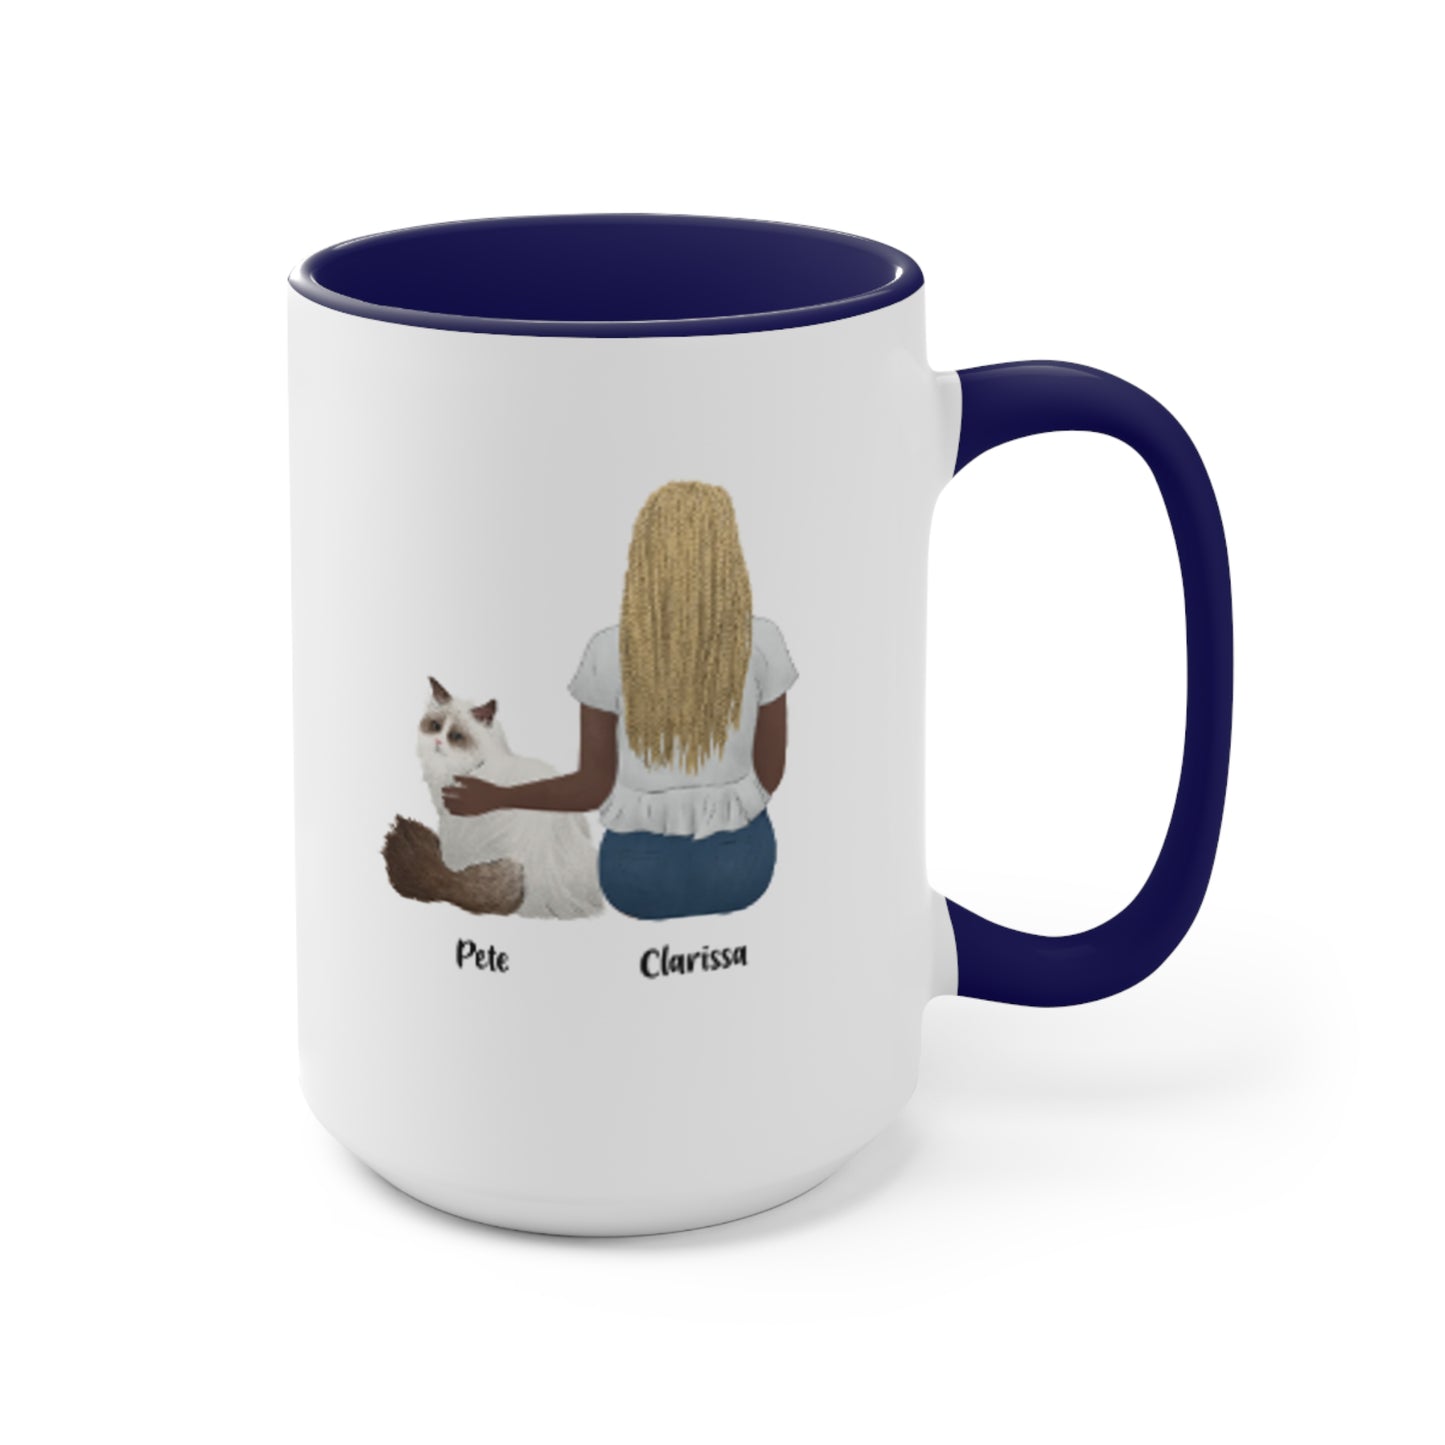 Personalized Coffee Mugs, 15oz - All I need is Coffee & my Kitty! (Customize in Store with live preview)